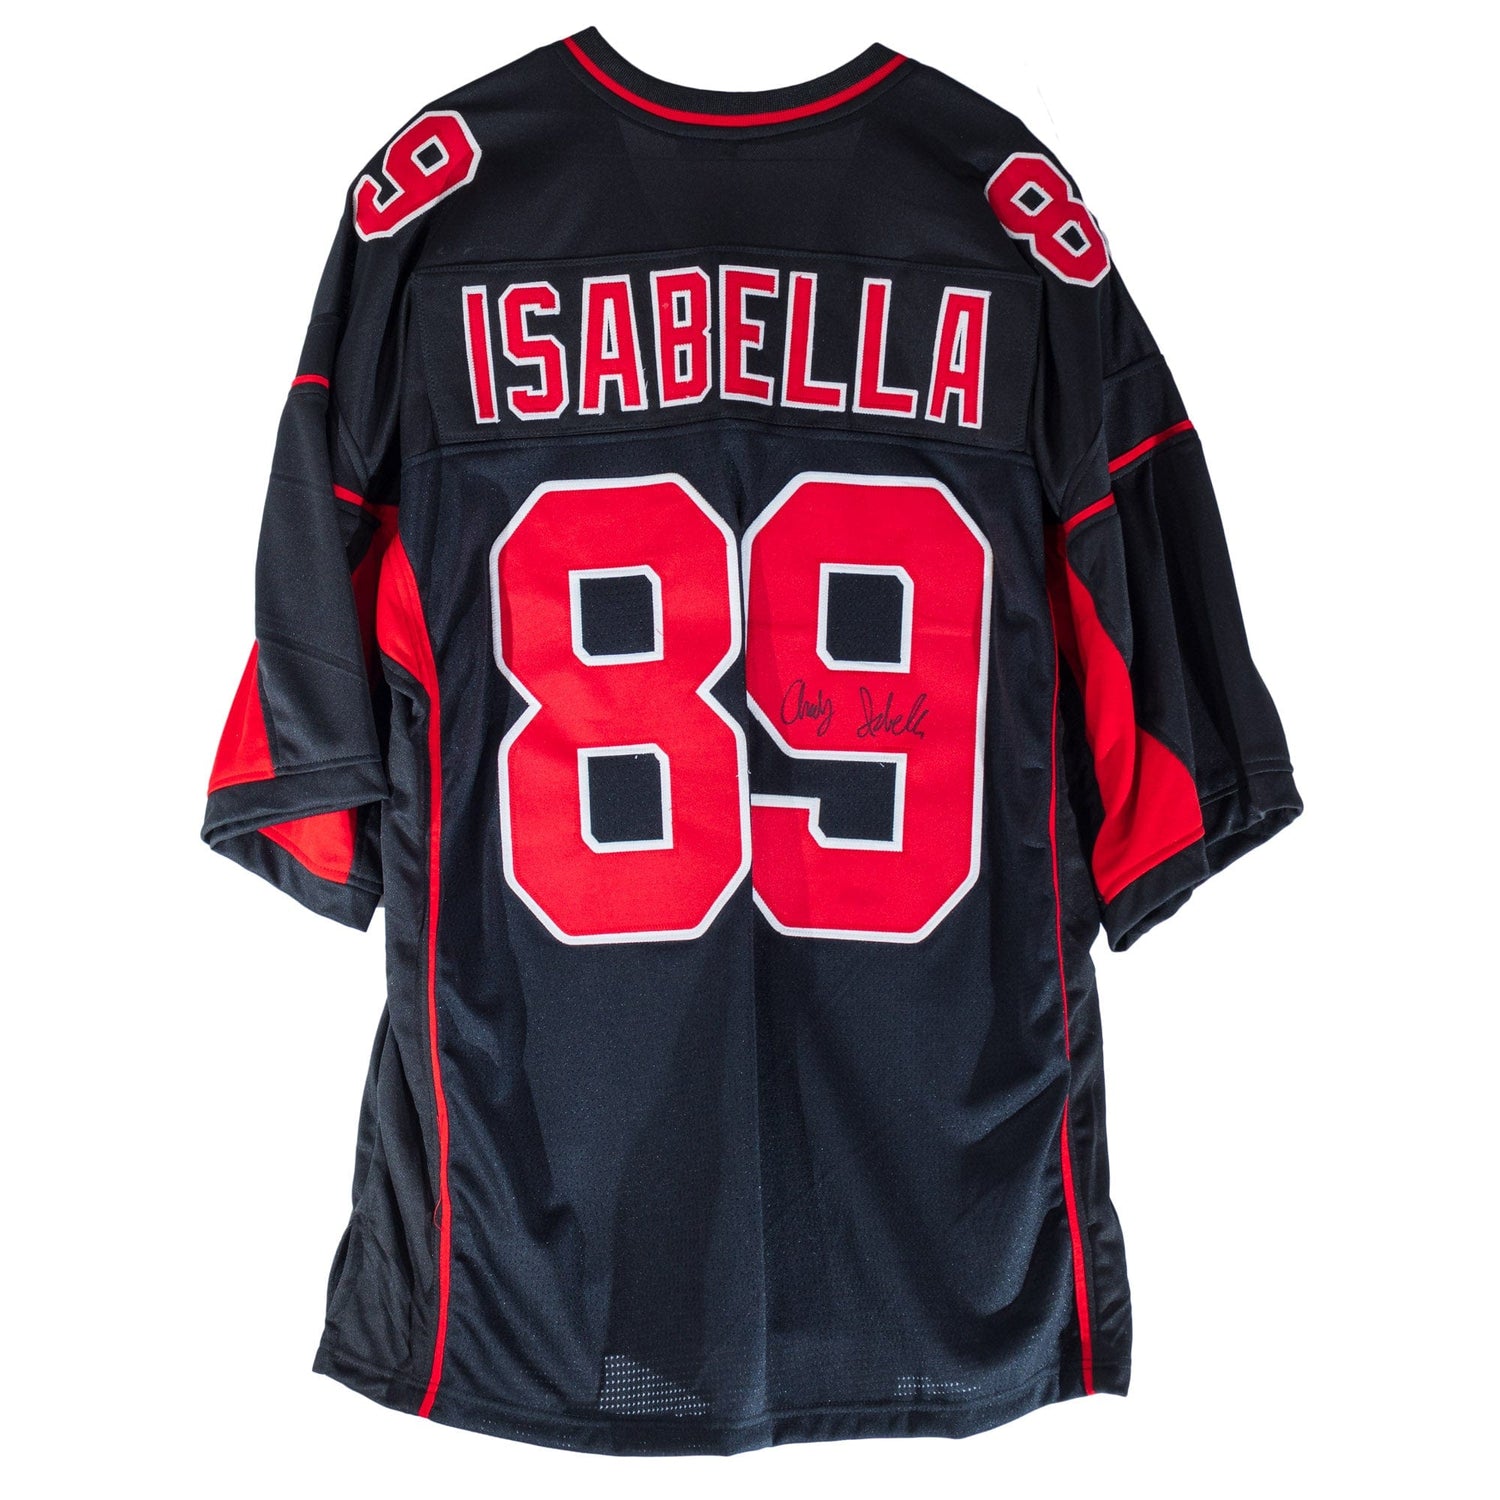 Andy Isabella Signed Jersey Reverse